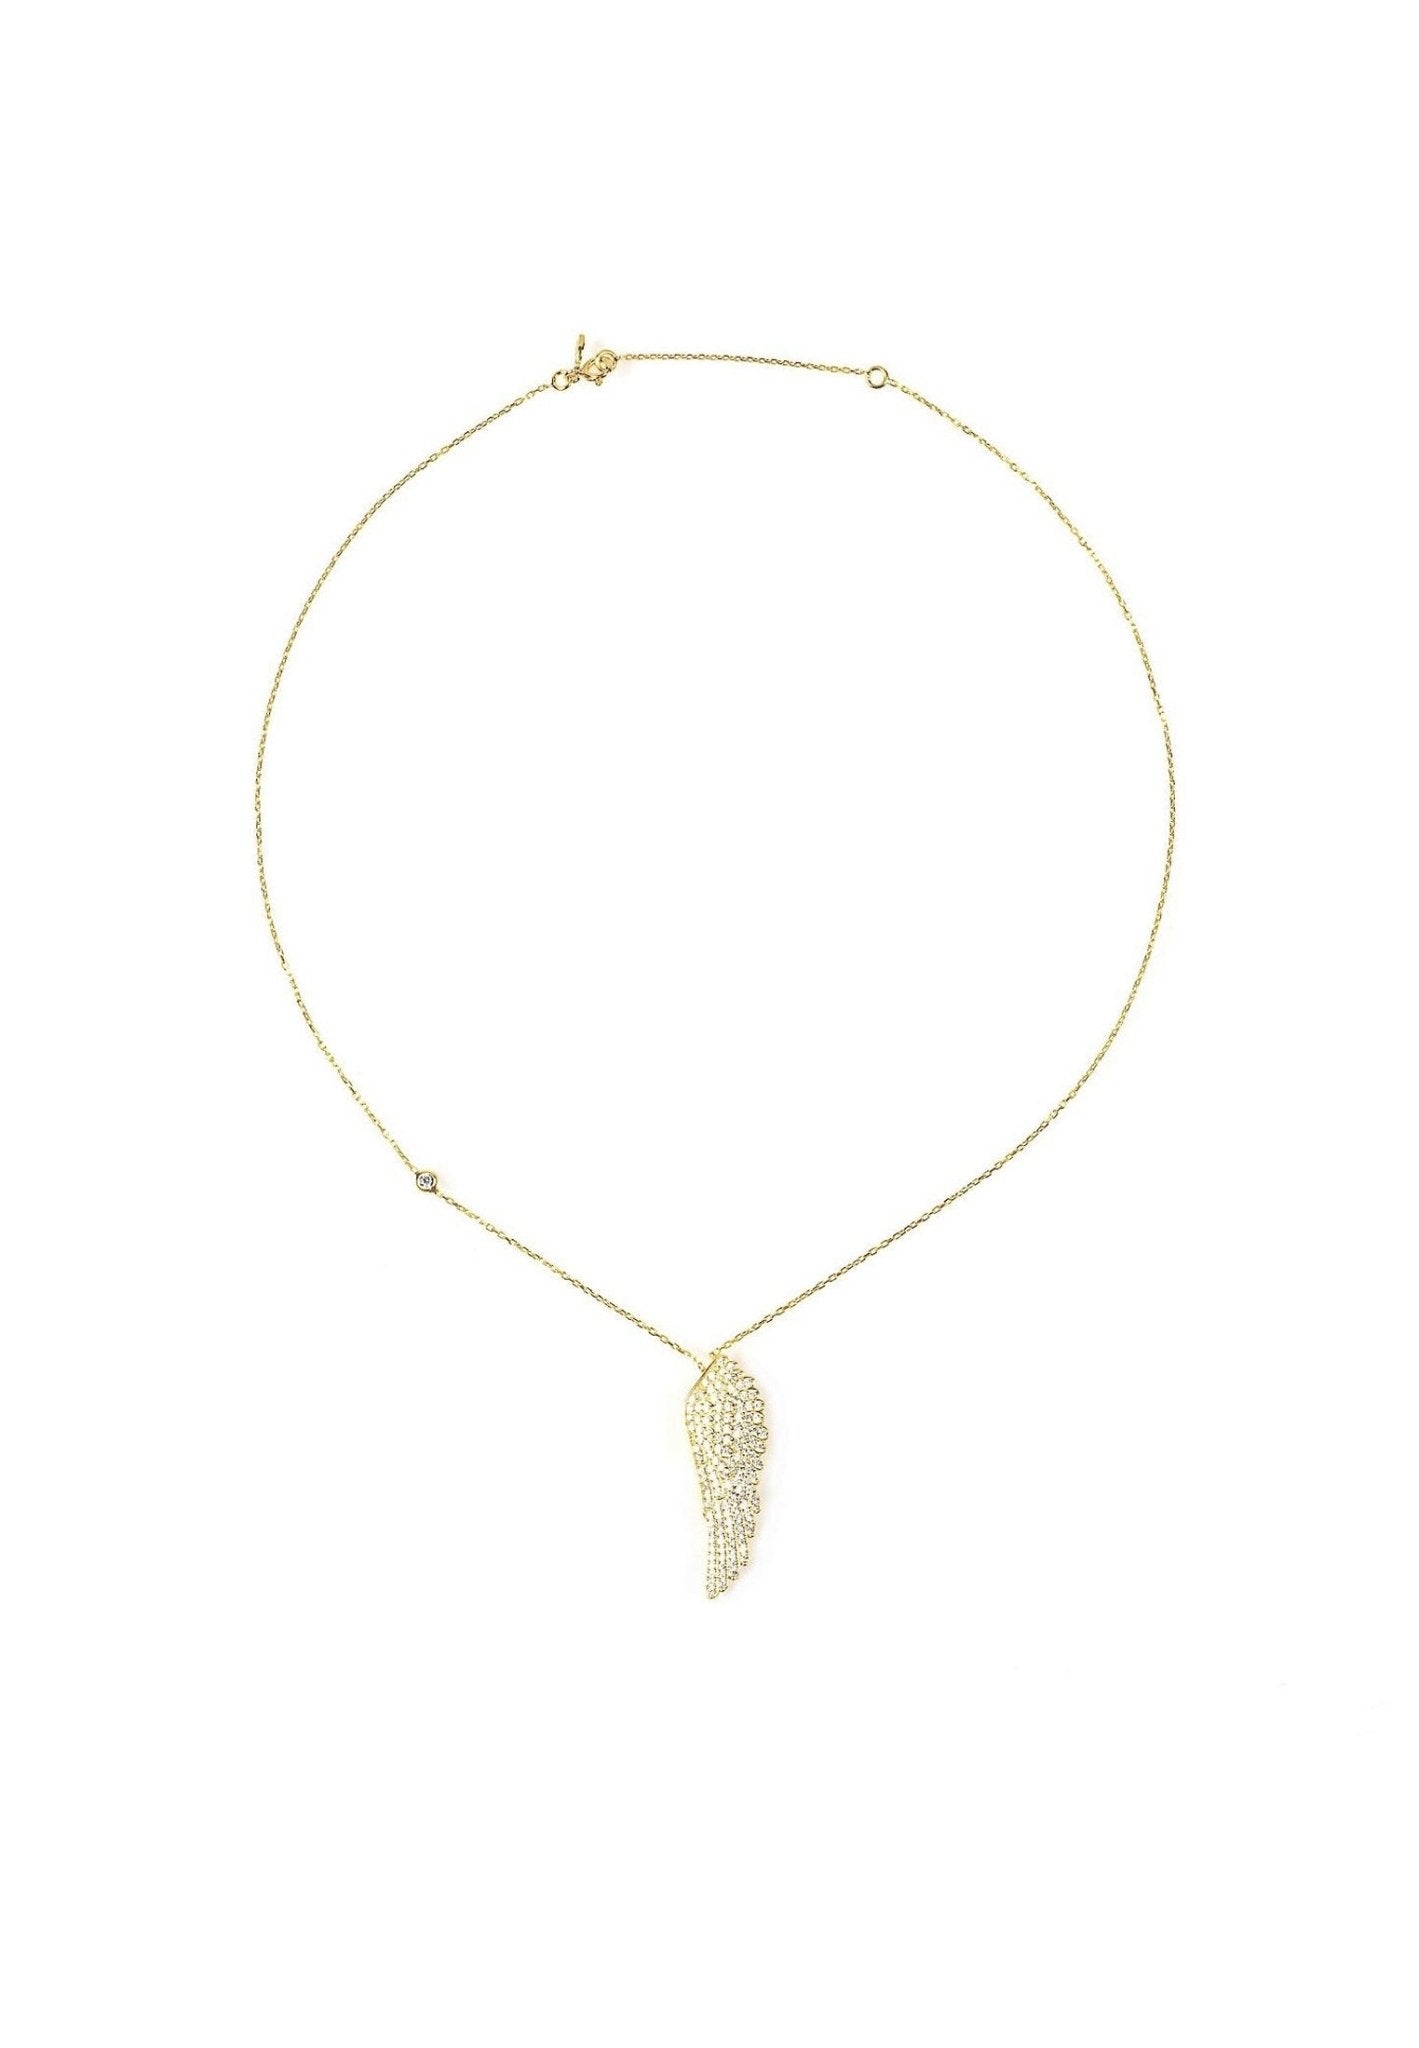 Angel Wing Necklace Large - LATELITA Necklaces